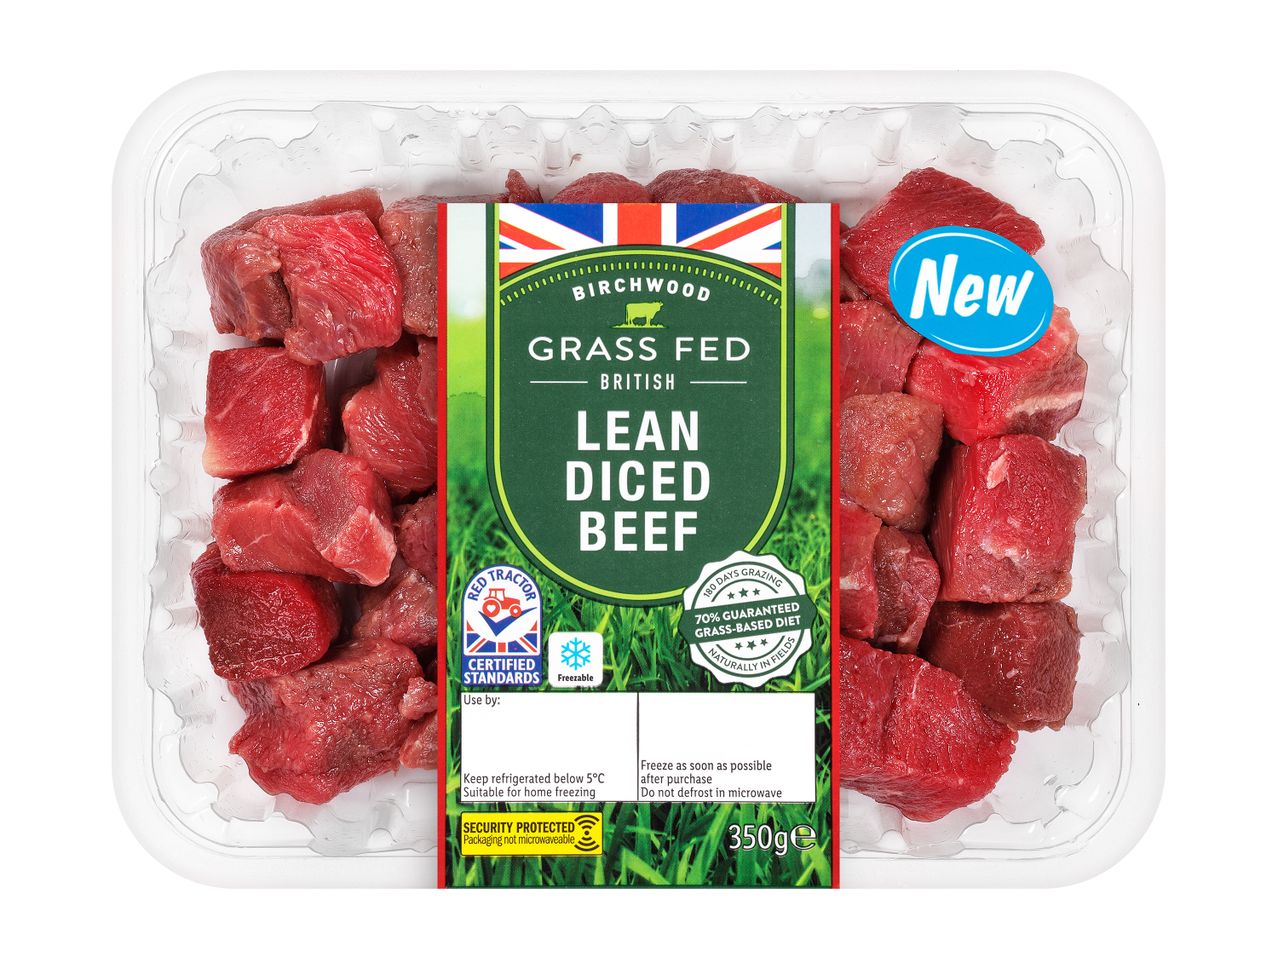 Go to full screen view: Birchwood Grass Fed Lean Diced British Beef - Image 1